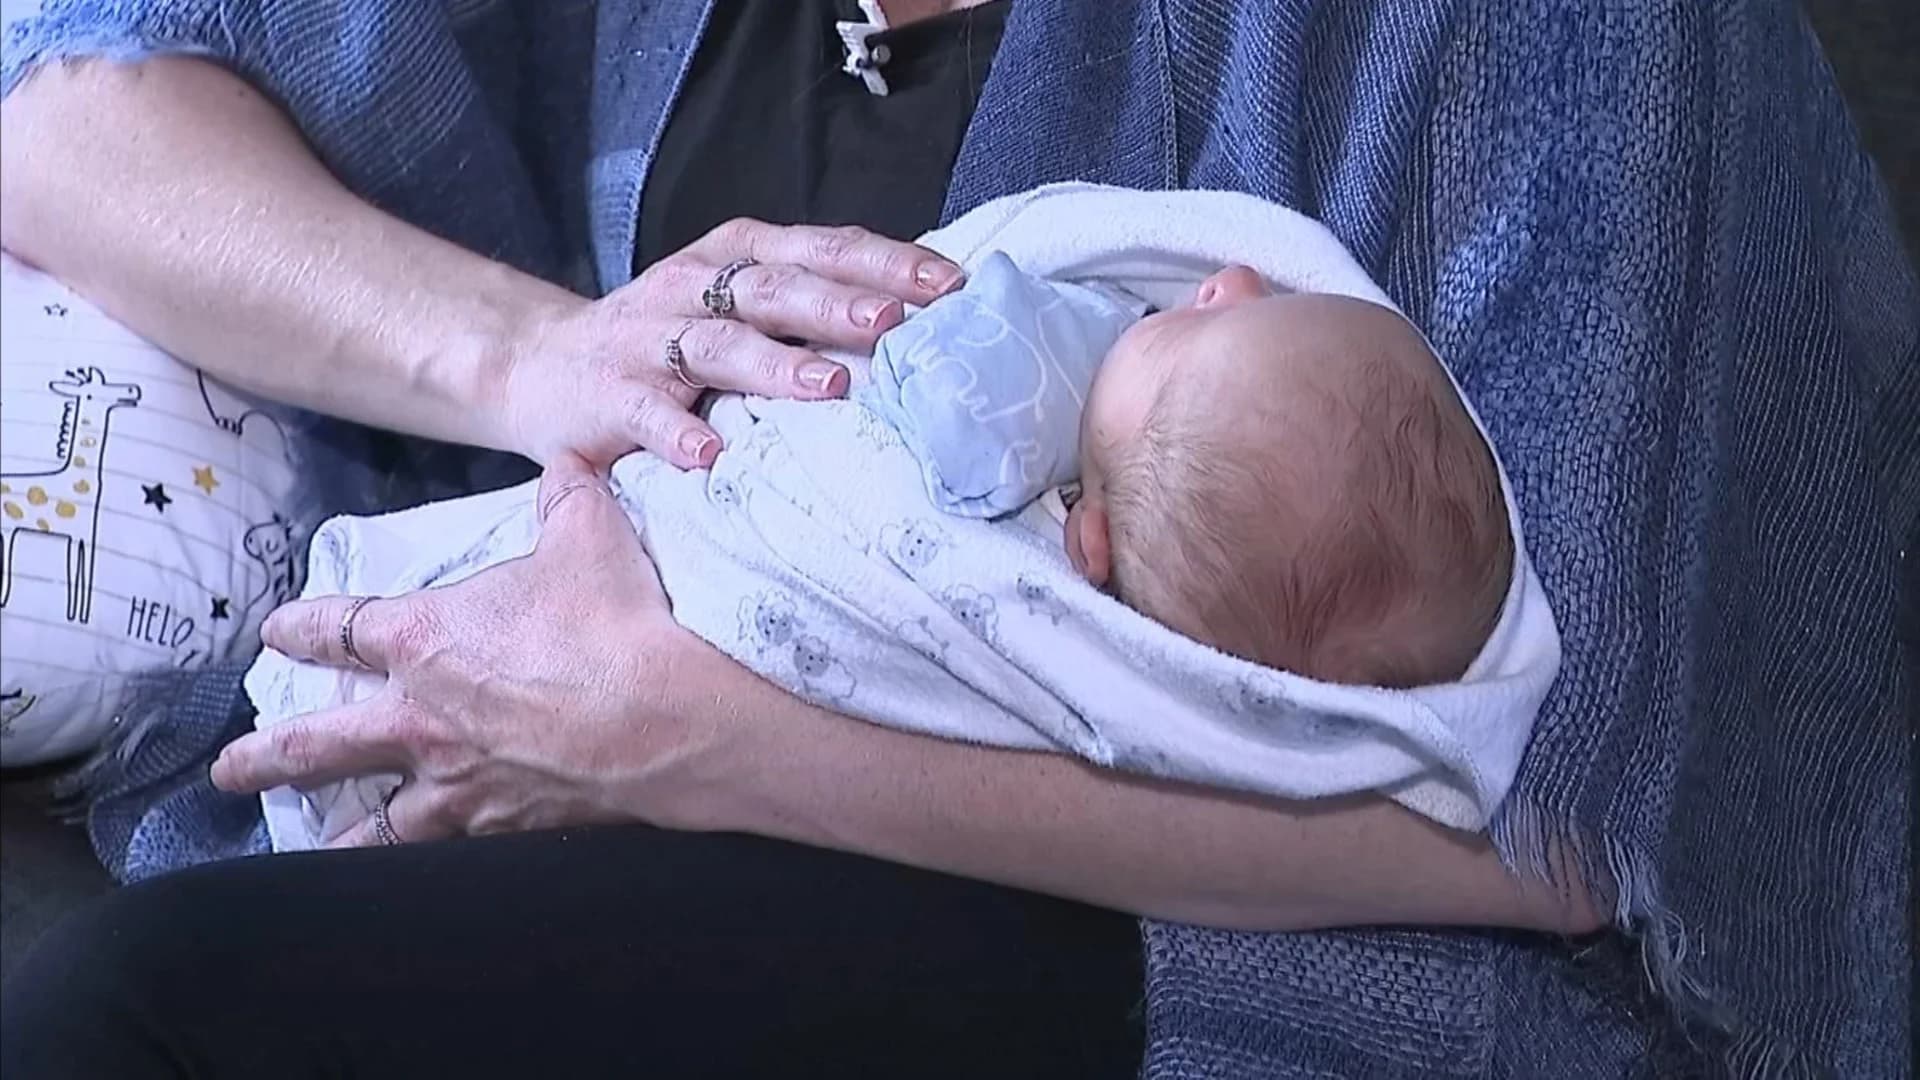 The circle of life: Woman gives birth to son after year of grieving